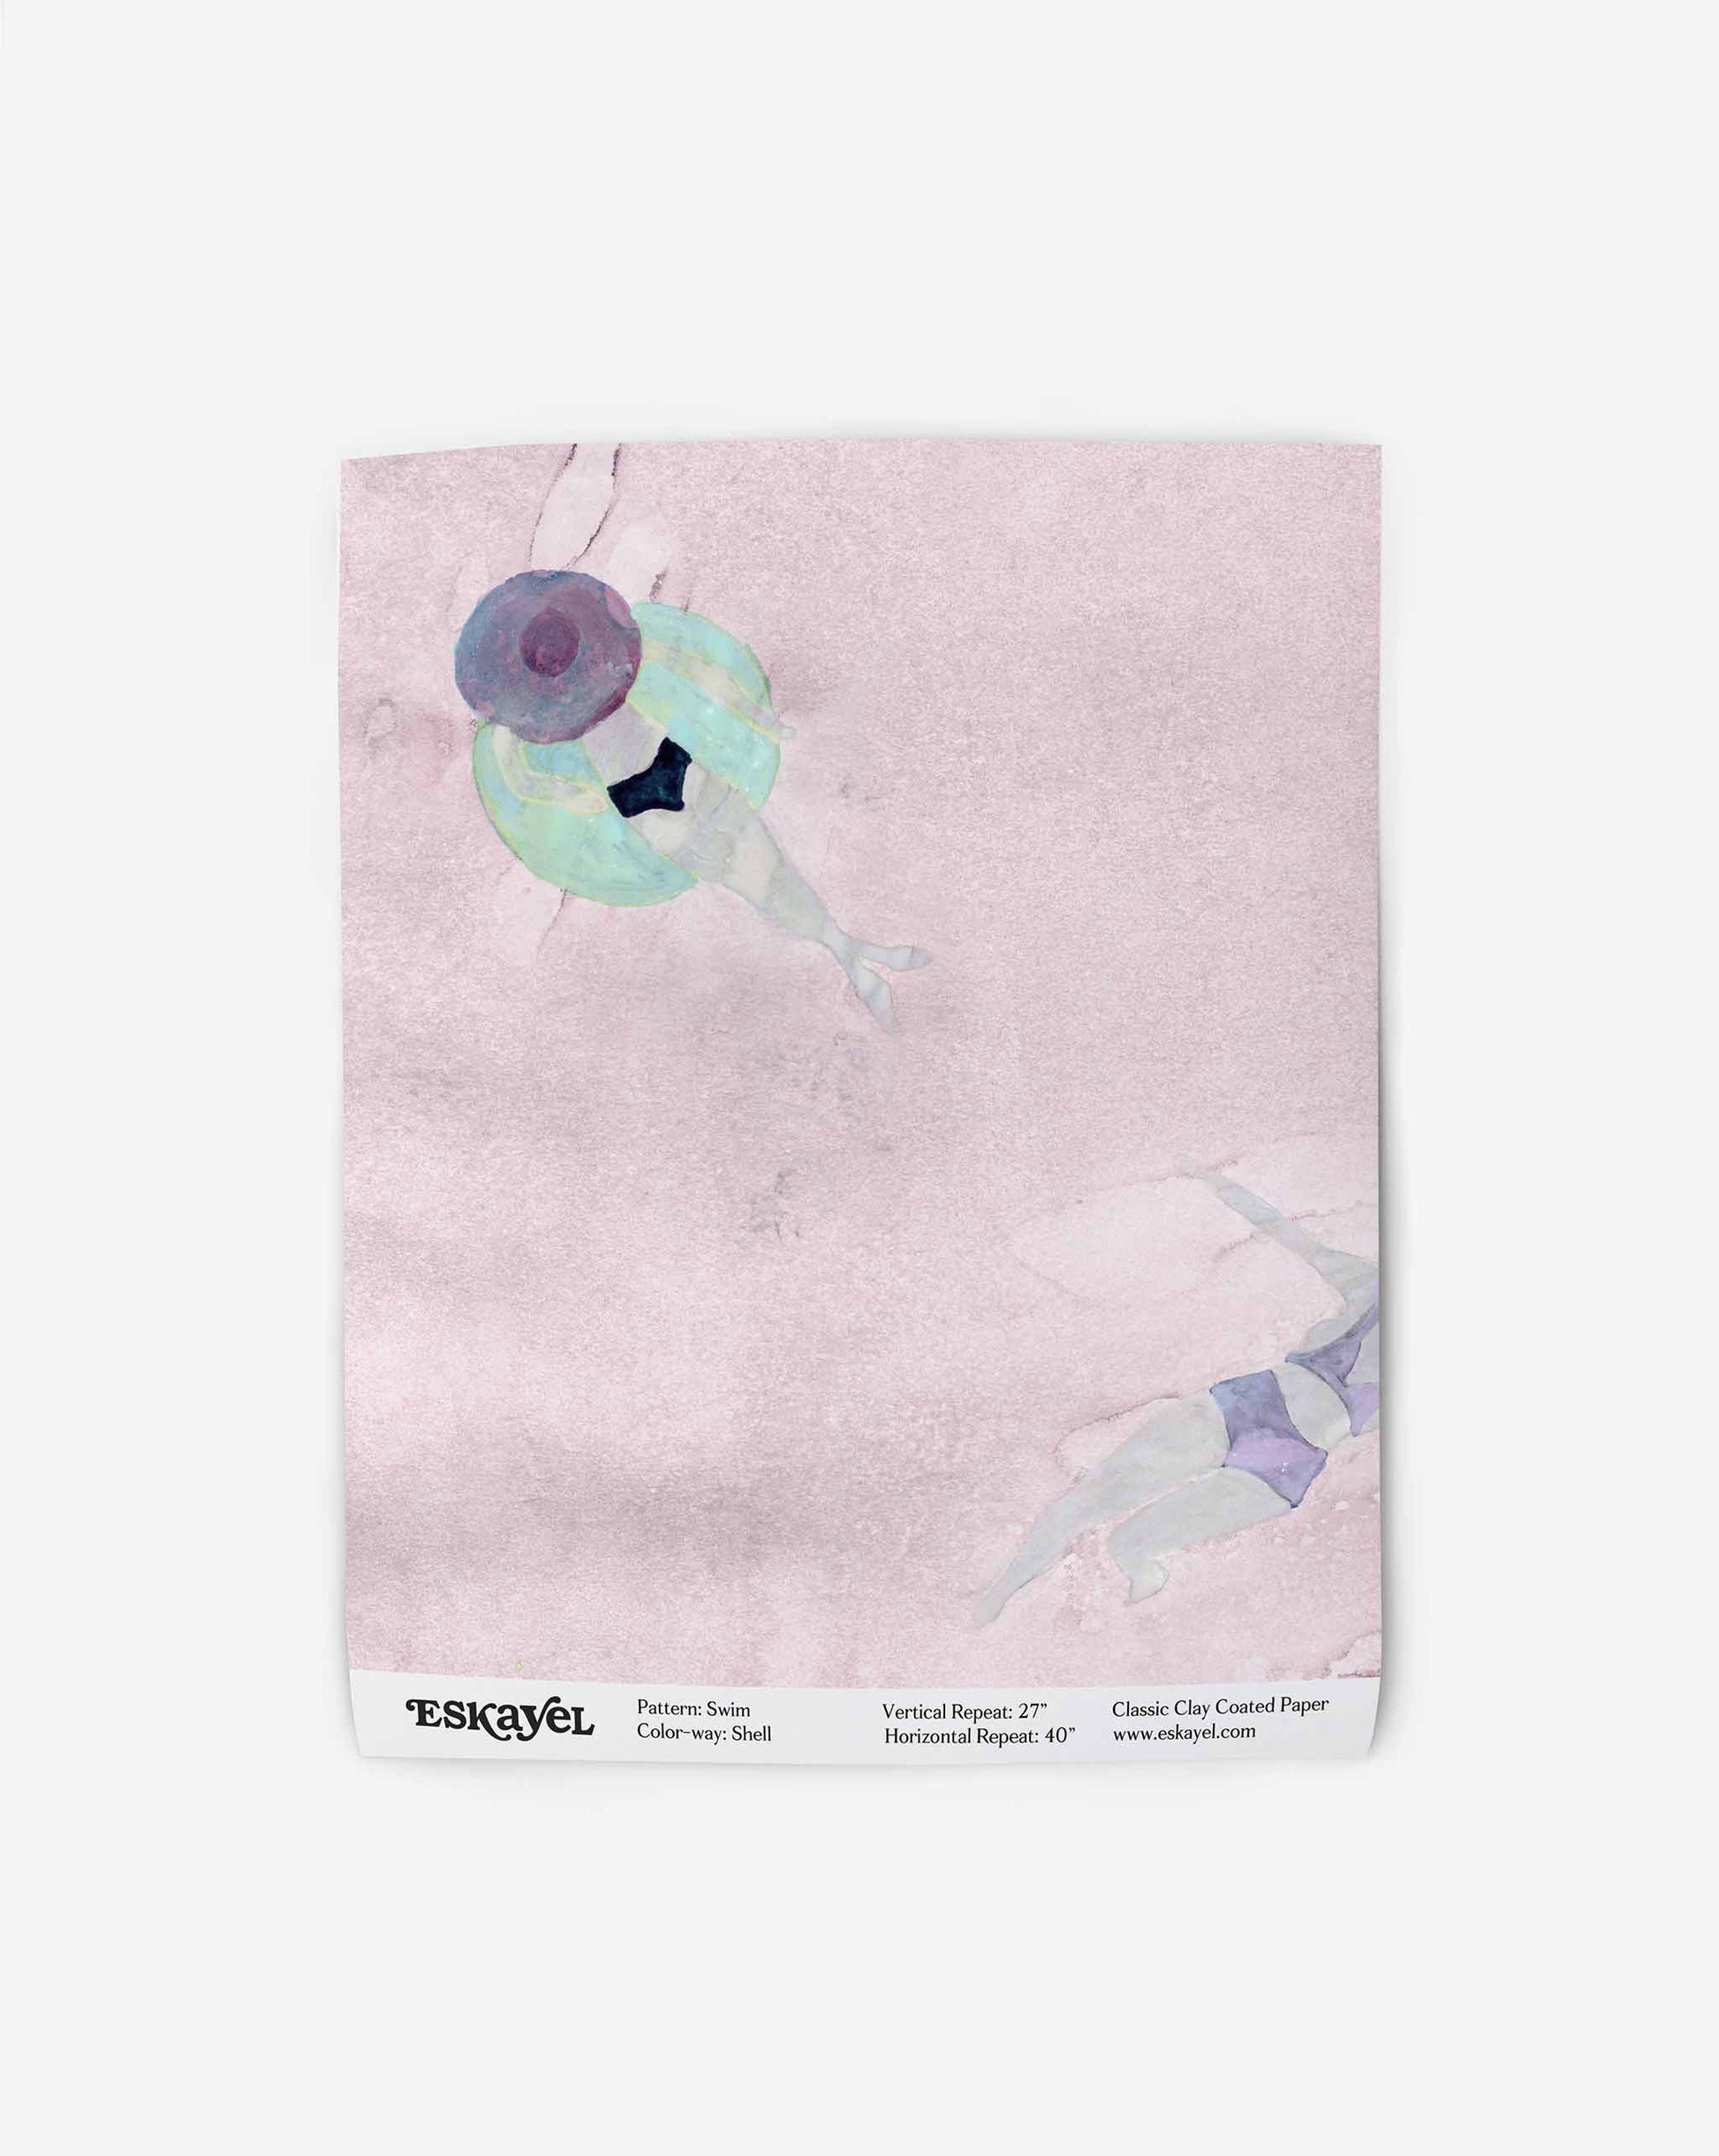 Two abstract figures swim in blue-green attire on a pinkish background, resembling watercolor art. Text at the bottom includes "ESKAYEL" and details about the pattern and paper. The Swim Wallpaper Sample||Shell is available upon order.